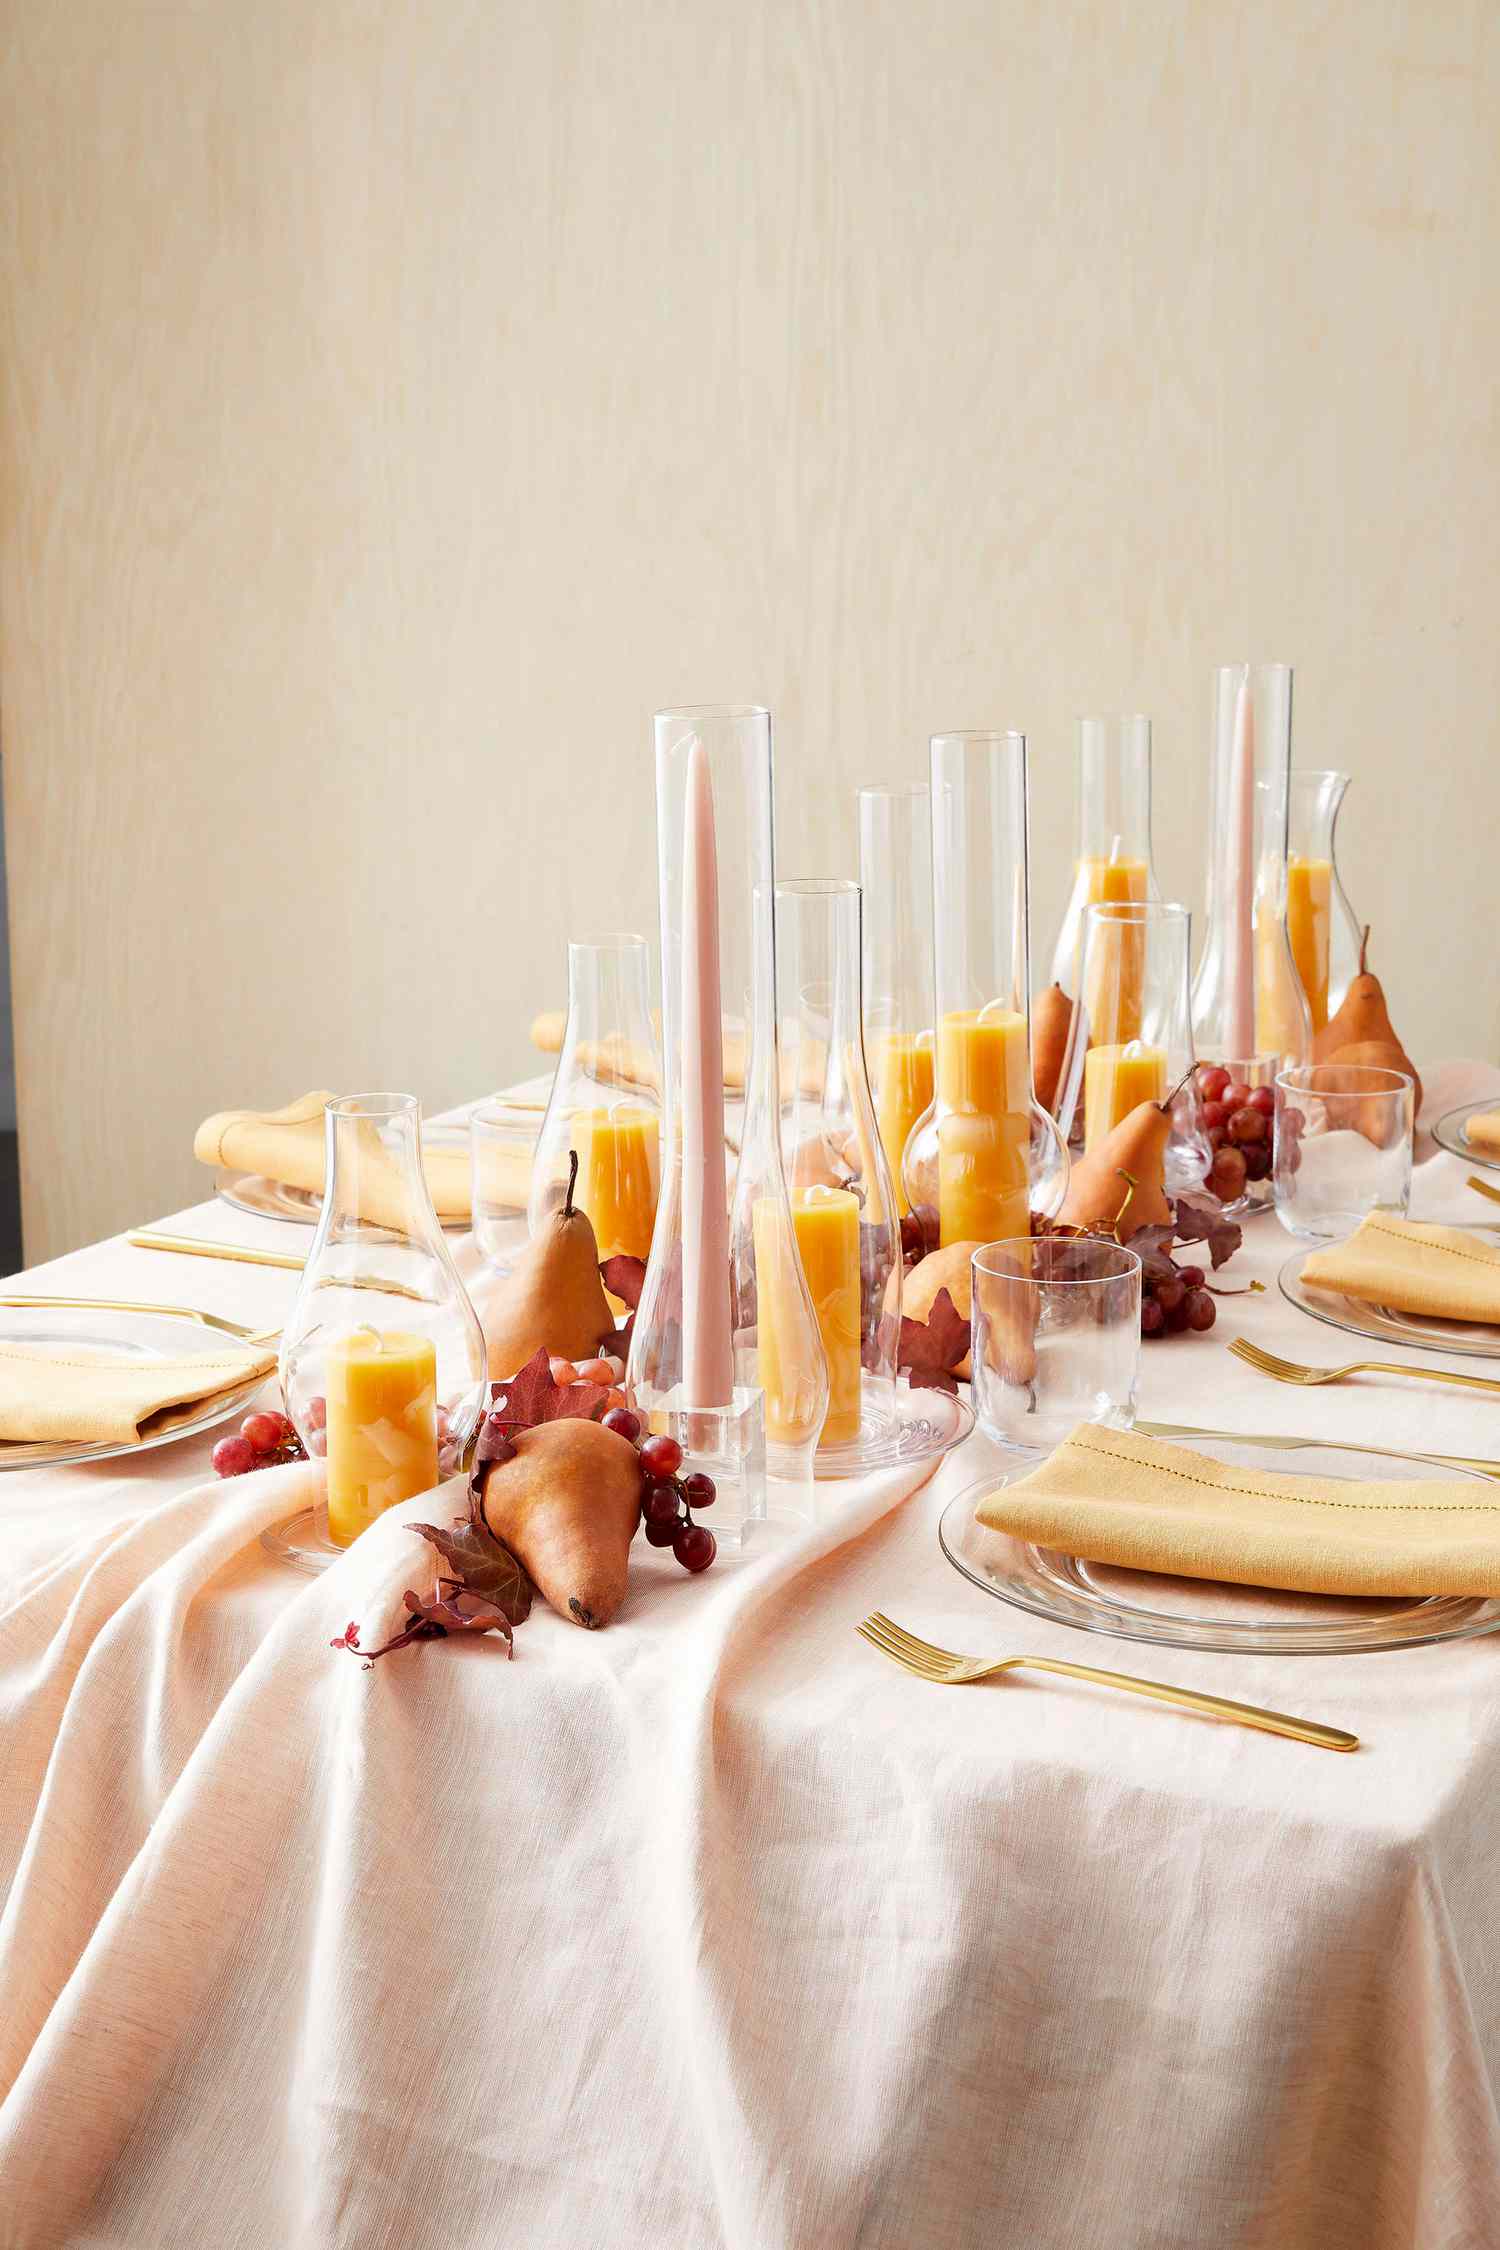 table decorated with candles in glass lamp chimneys and fruit